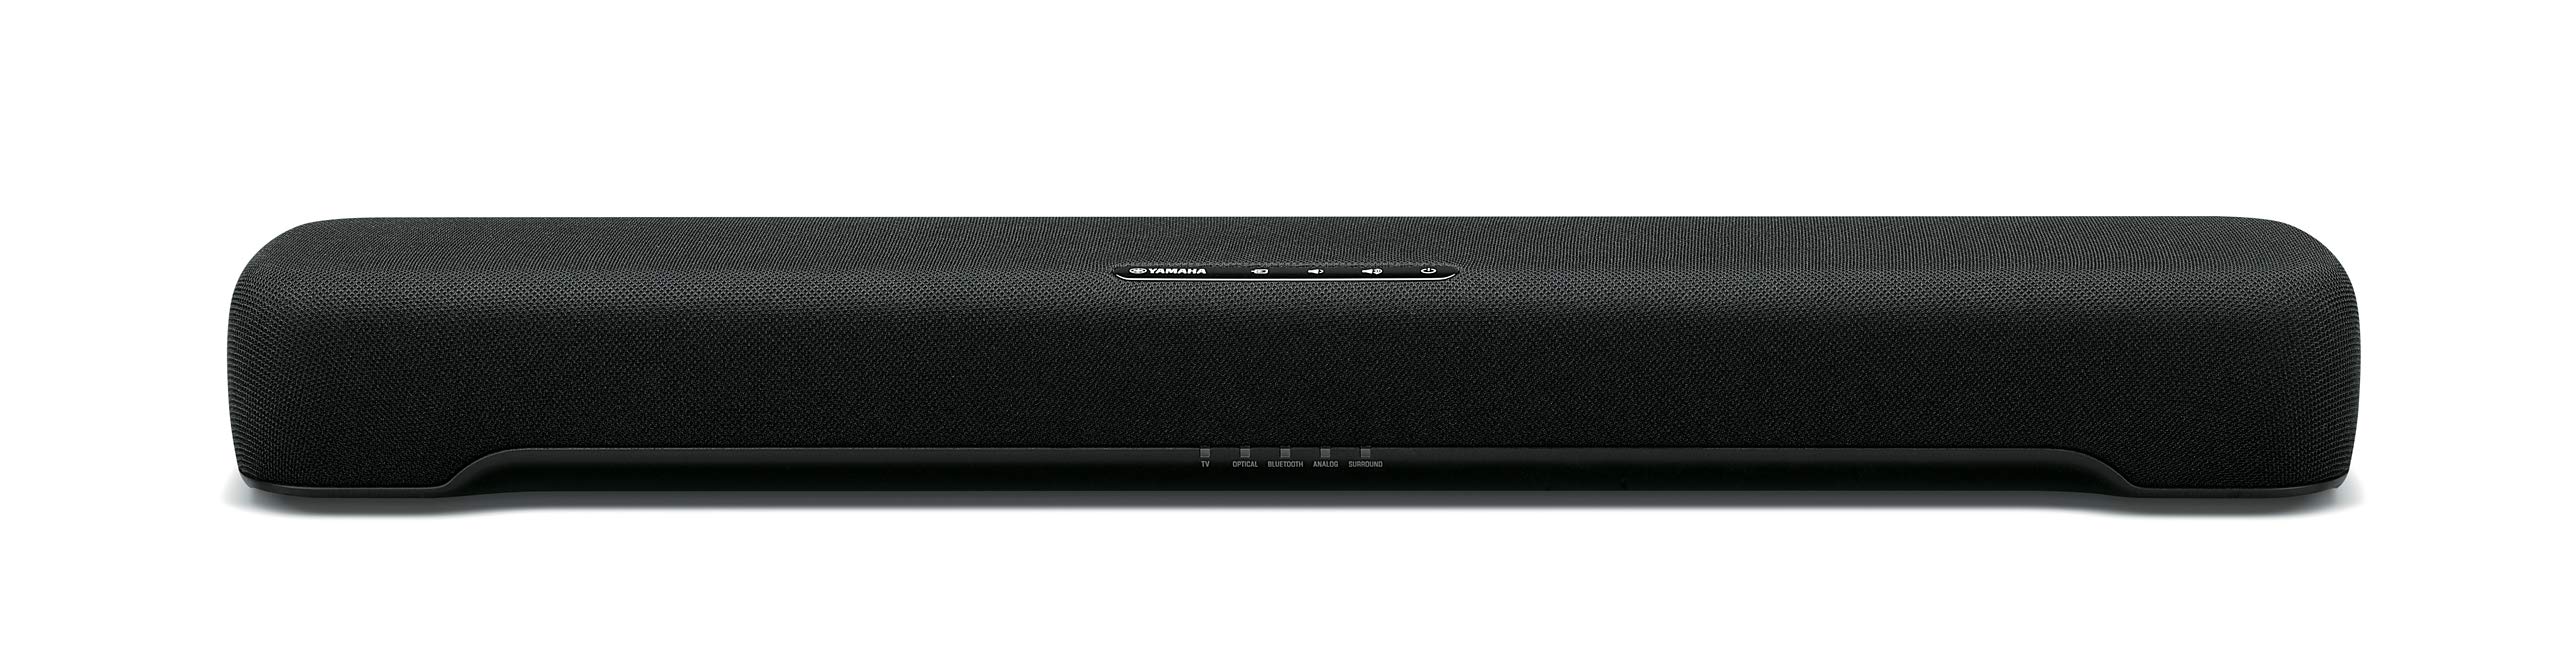 Yamaha Audio SR-C20A Compact Sound Bar with Built-in Subwoofer and Bluetooth, Black